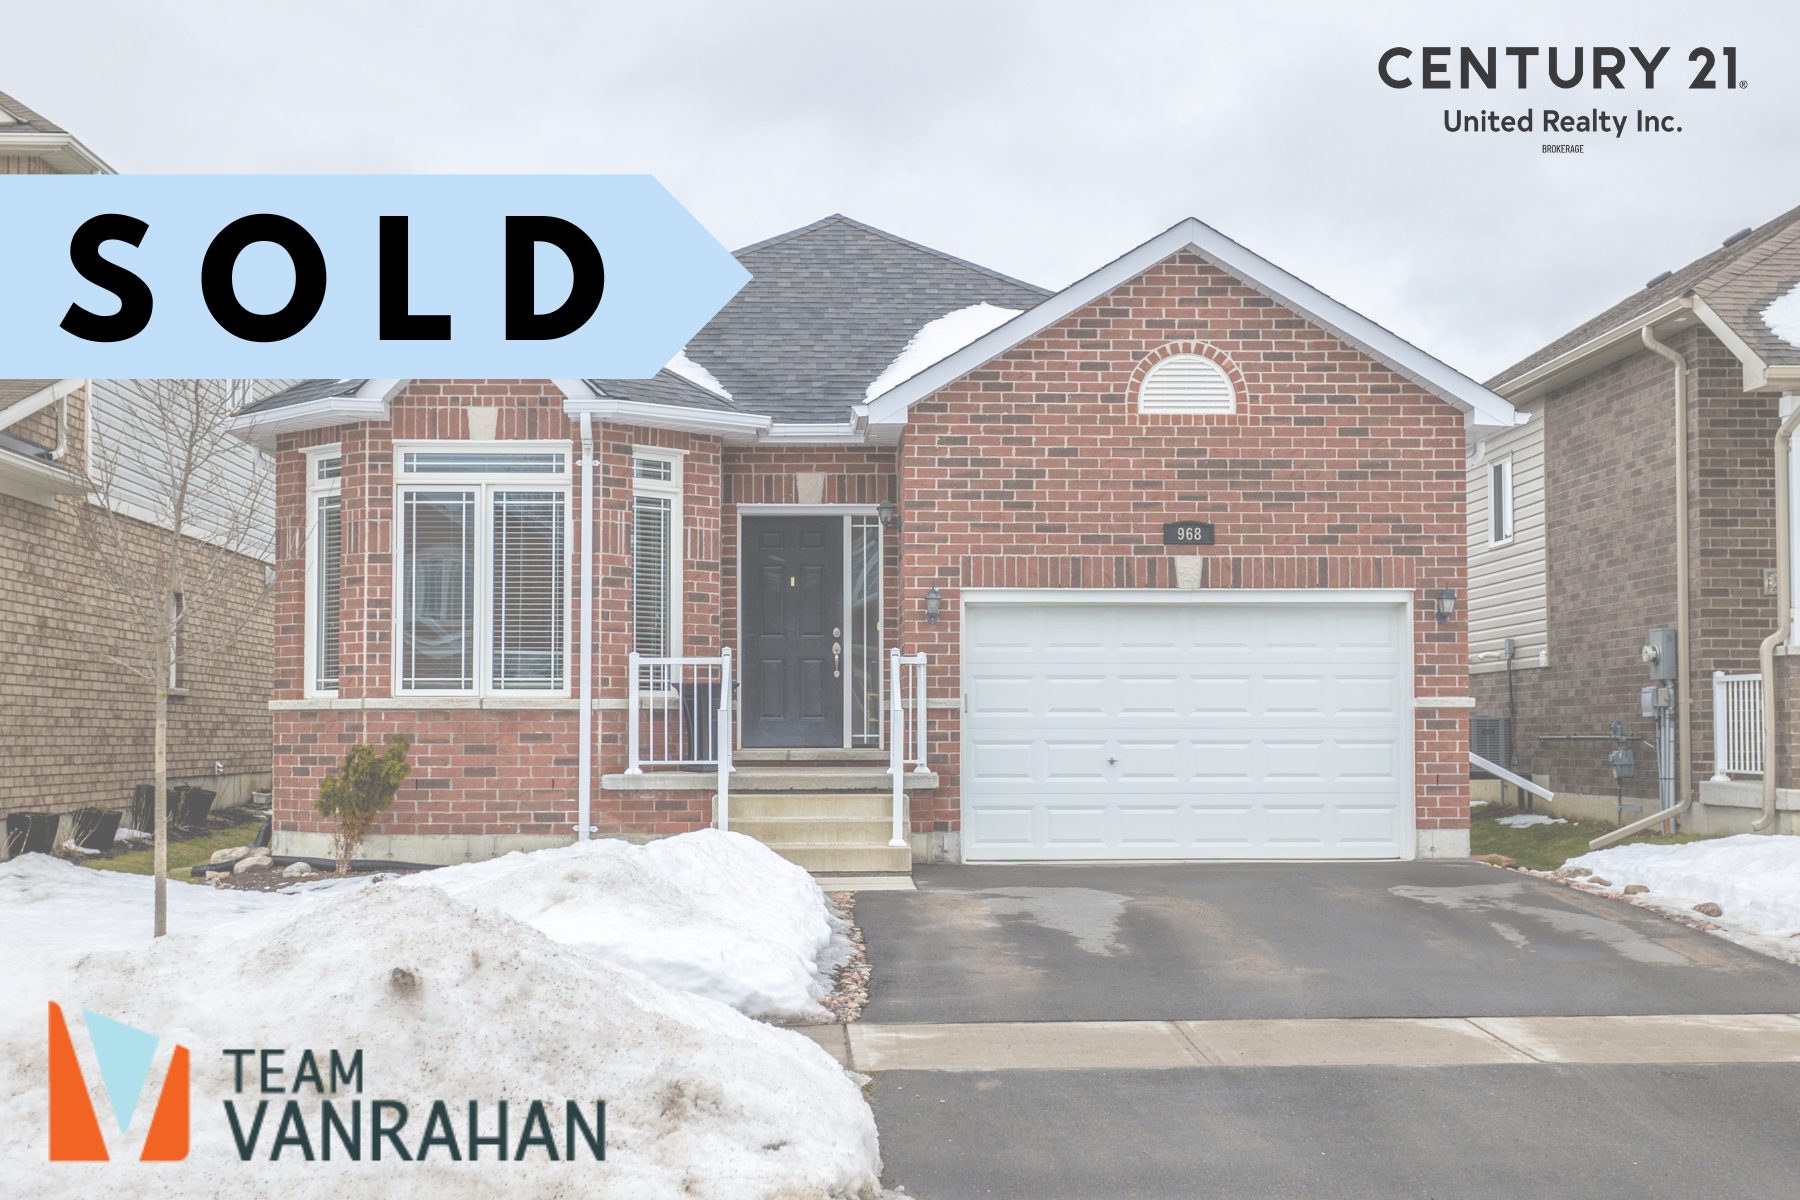 A newer brick bungalow with an attached garage and a bay window out front. SOLD text on top